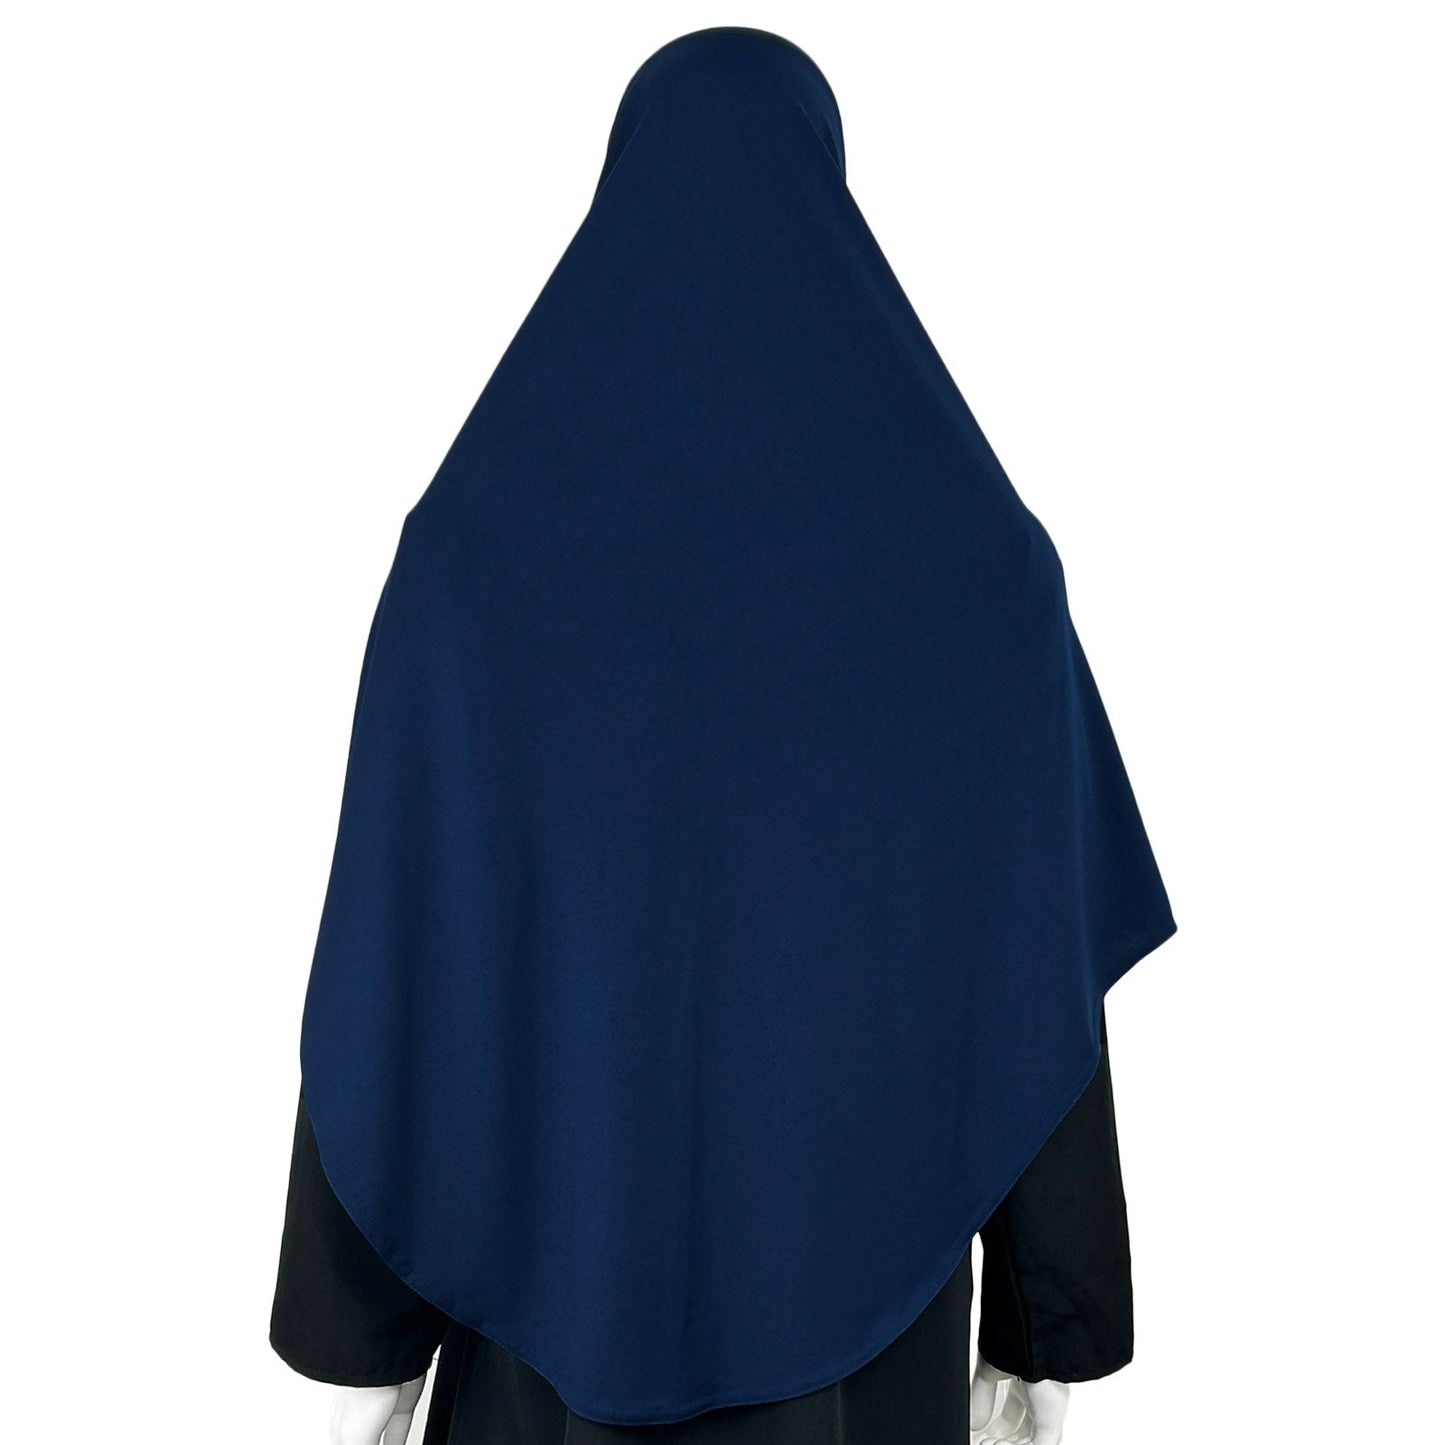 pull-on-instant-hijab-navy-blue-full-coverage